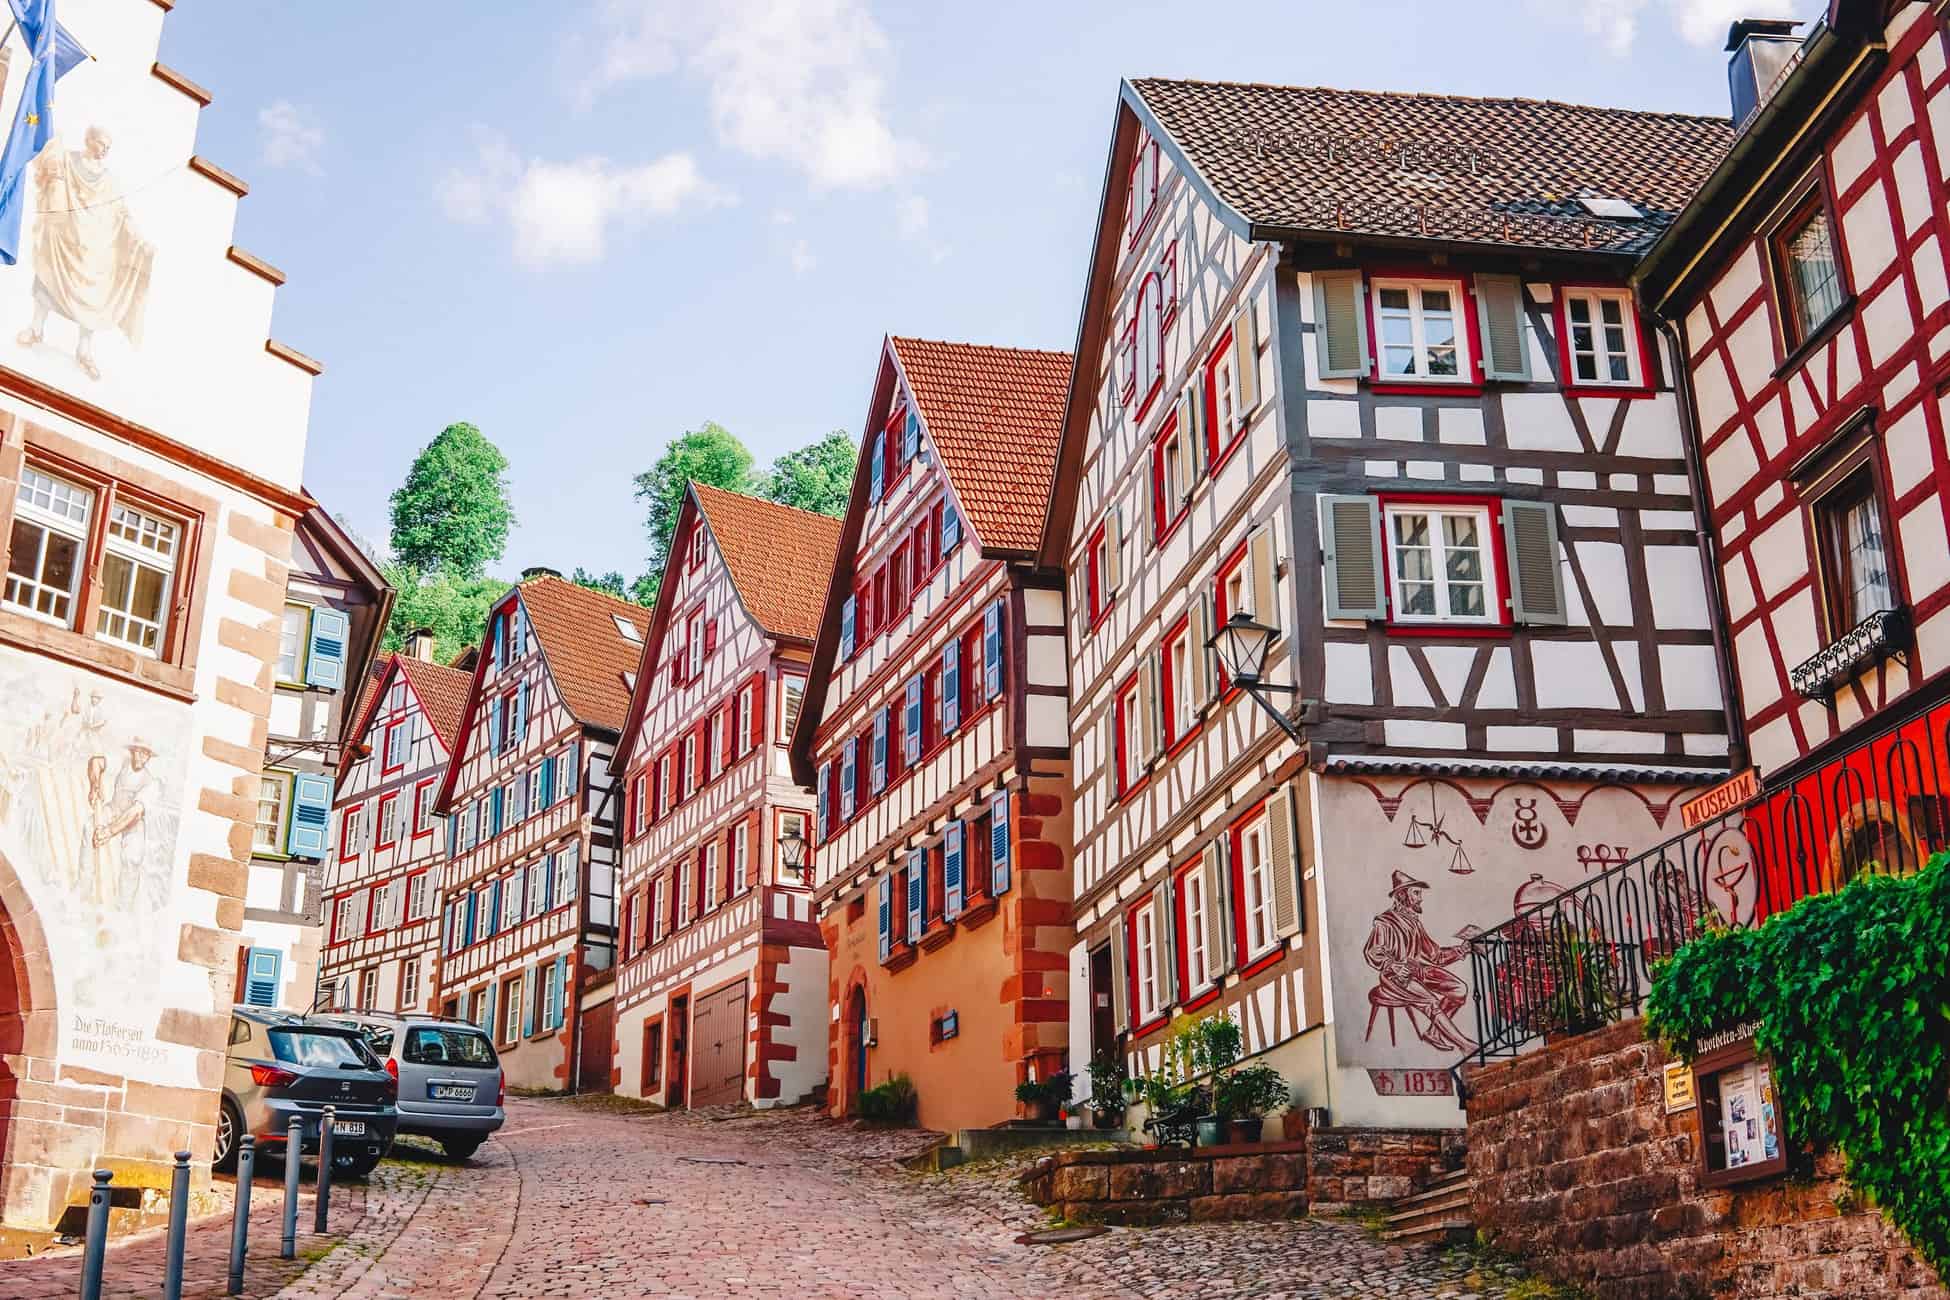 Road trip: Rhine Valley and Alsace in 3 days (Visit Germany & France)